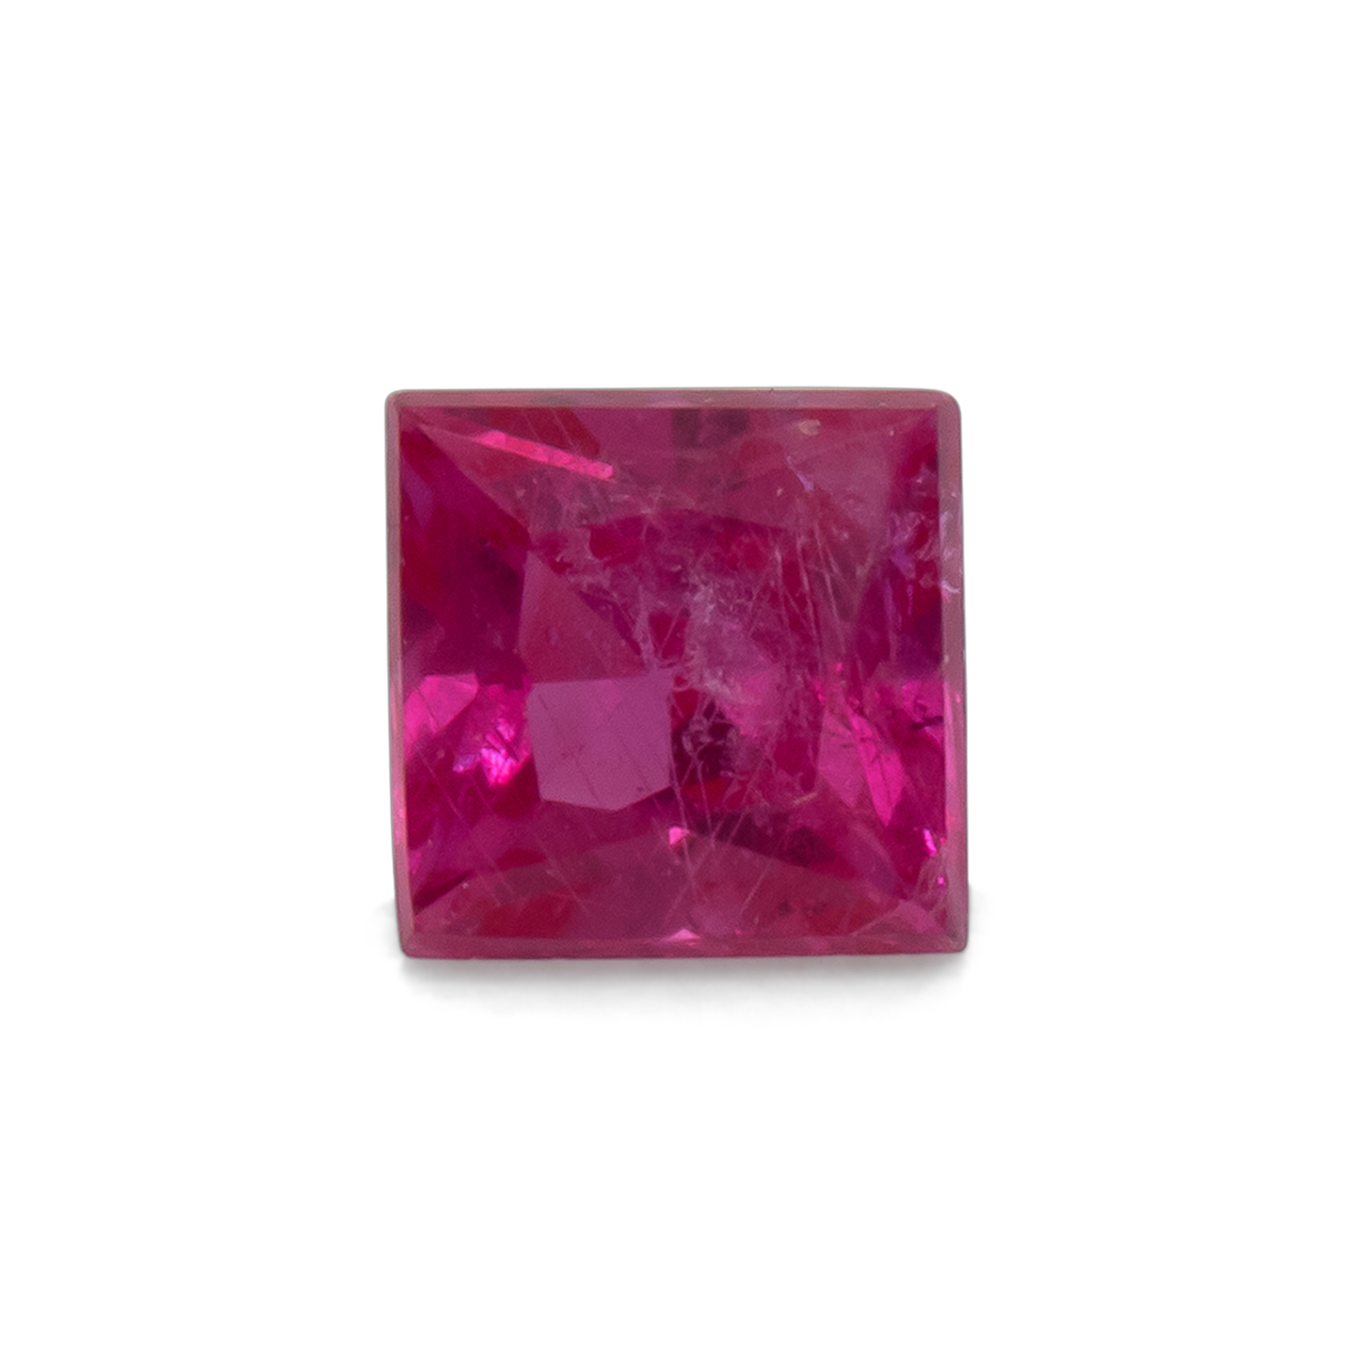 Sapphire - pink, square, 2.3x2.3 mm, 0.08 - 0.10 cts, No. XSR11248